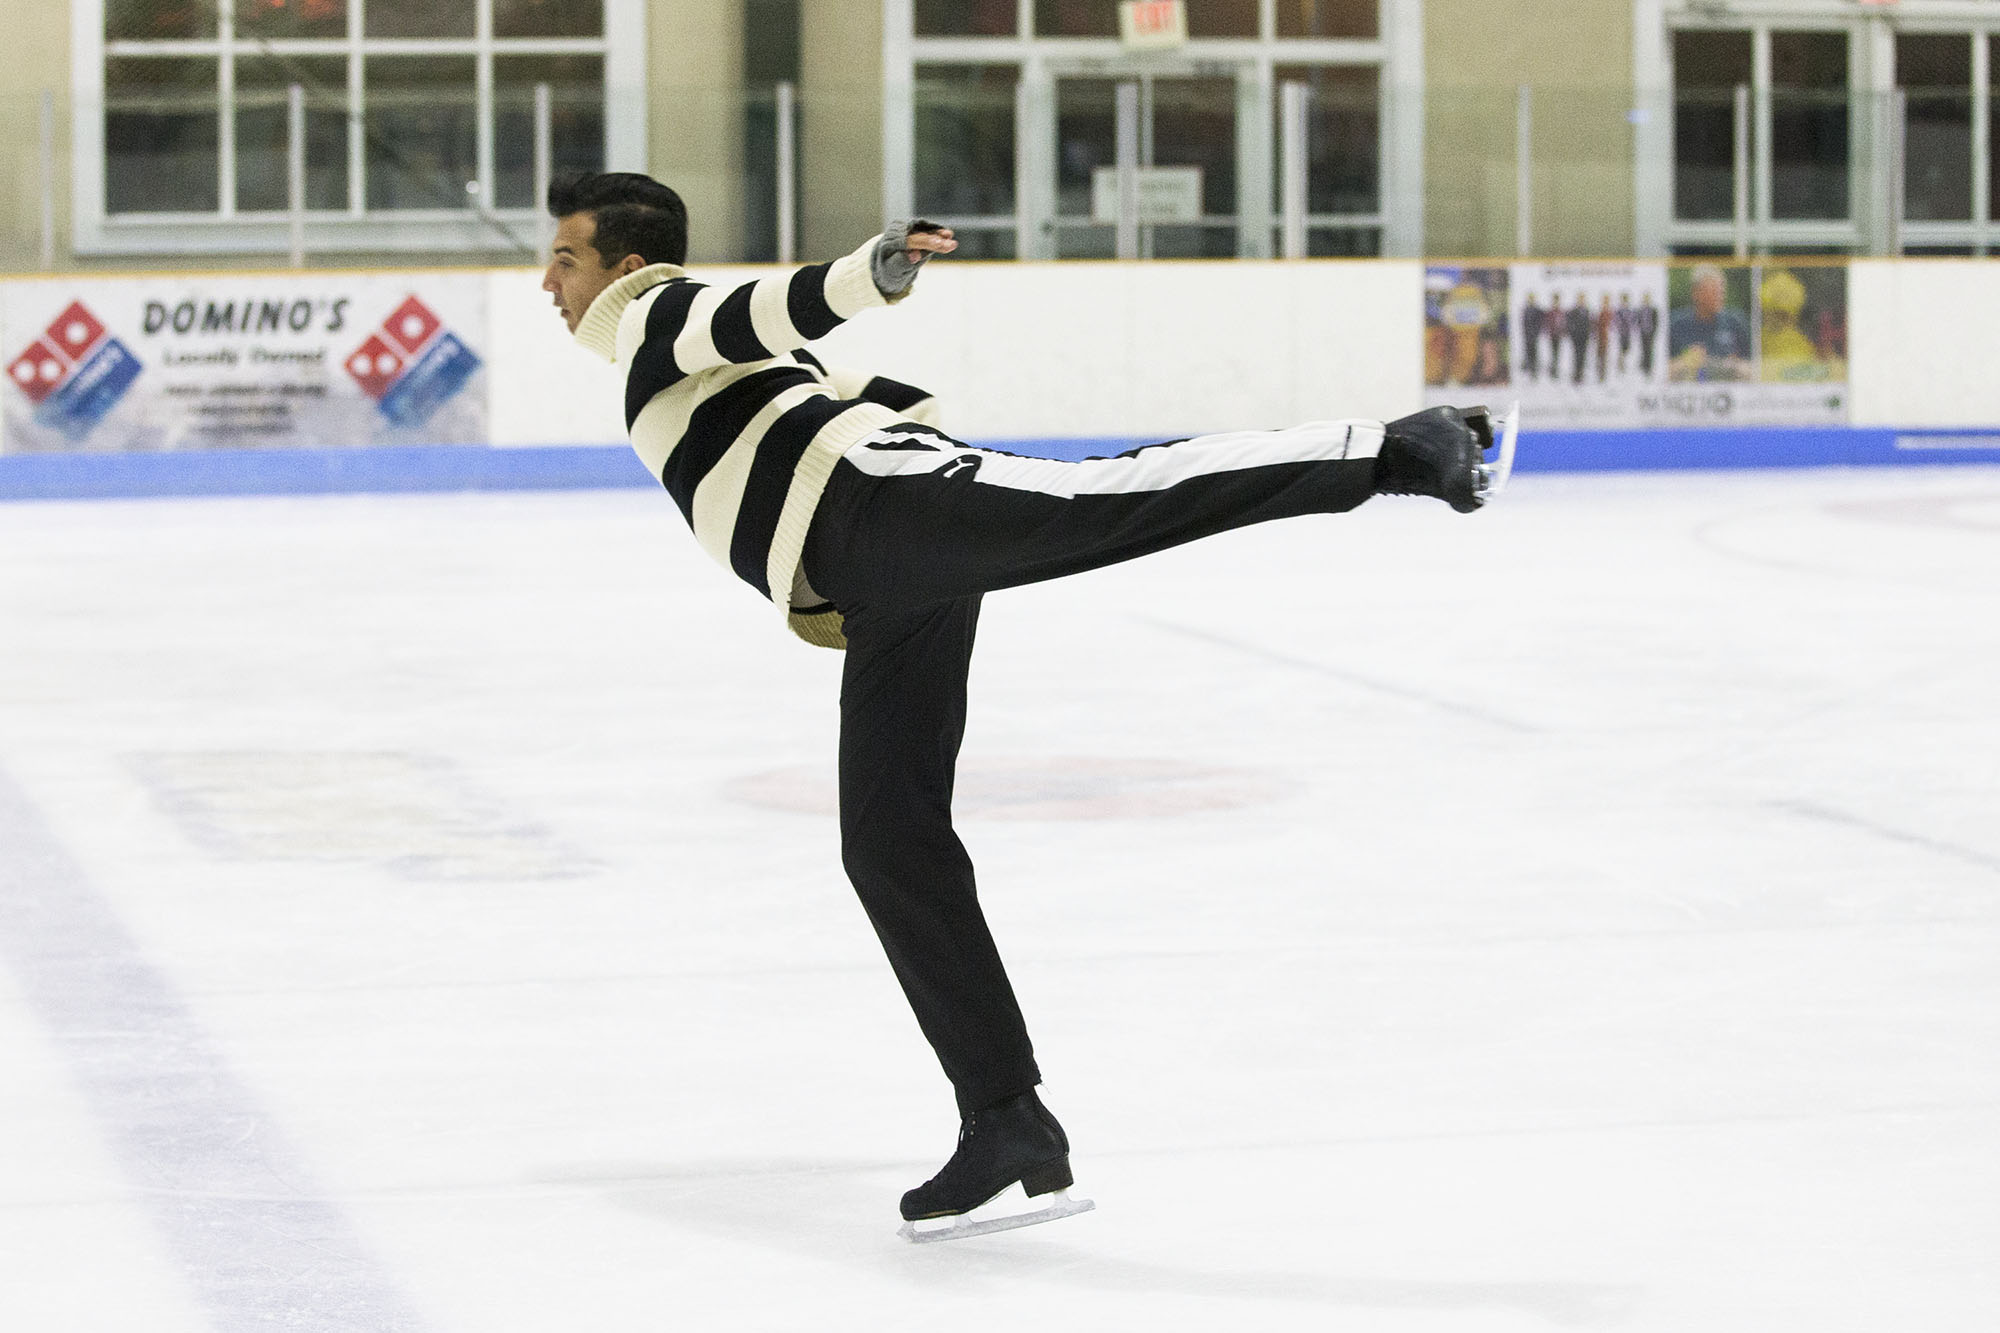 Christopher Ali skating on the ice with one leg raised and arms spread apart